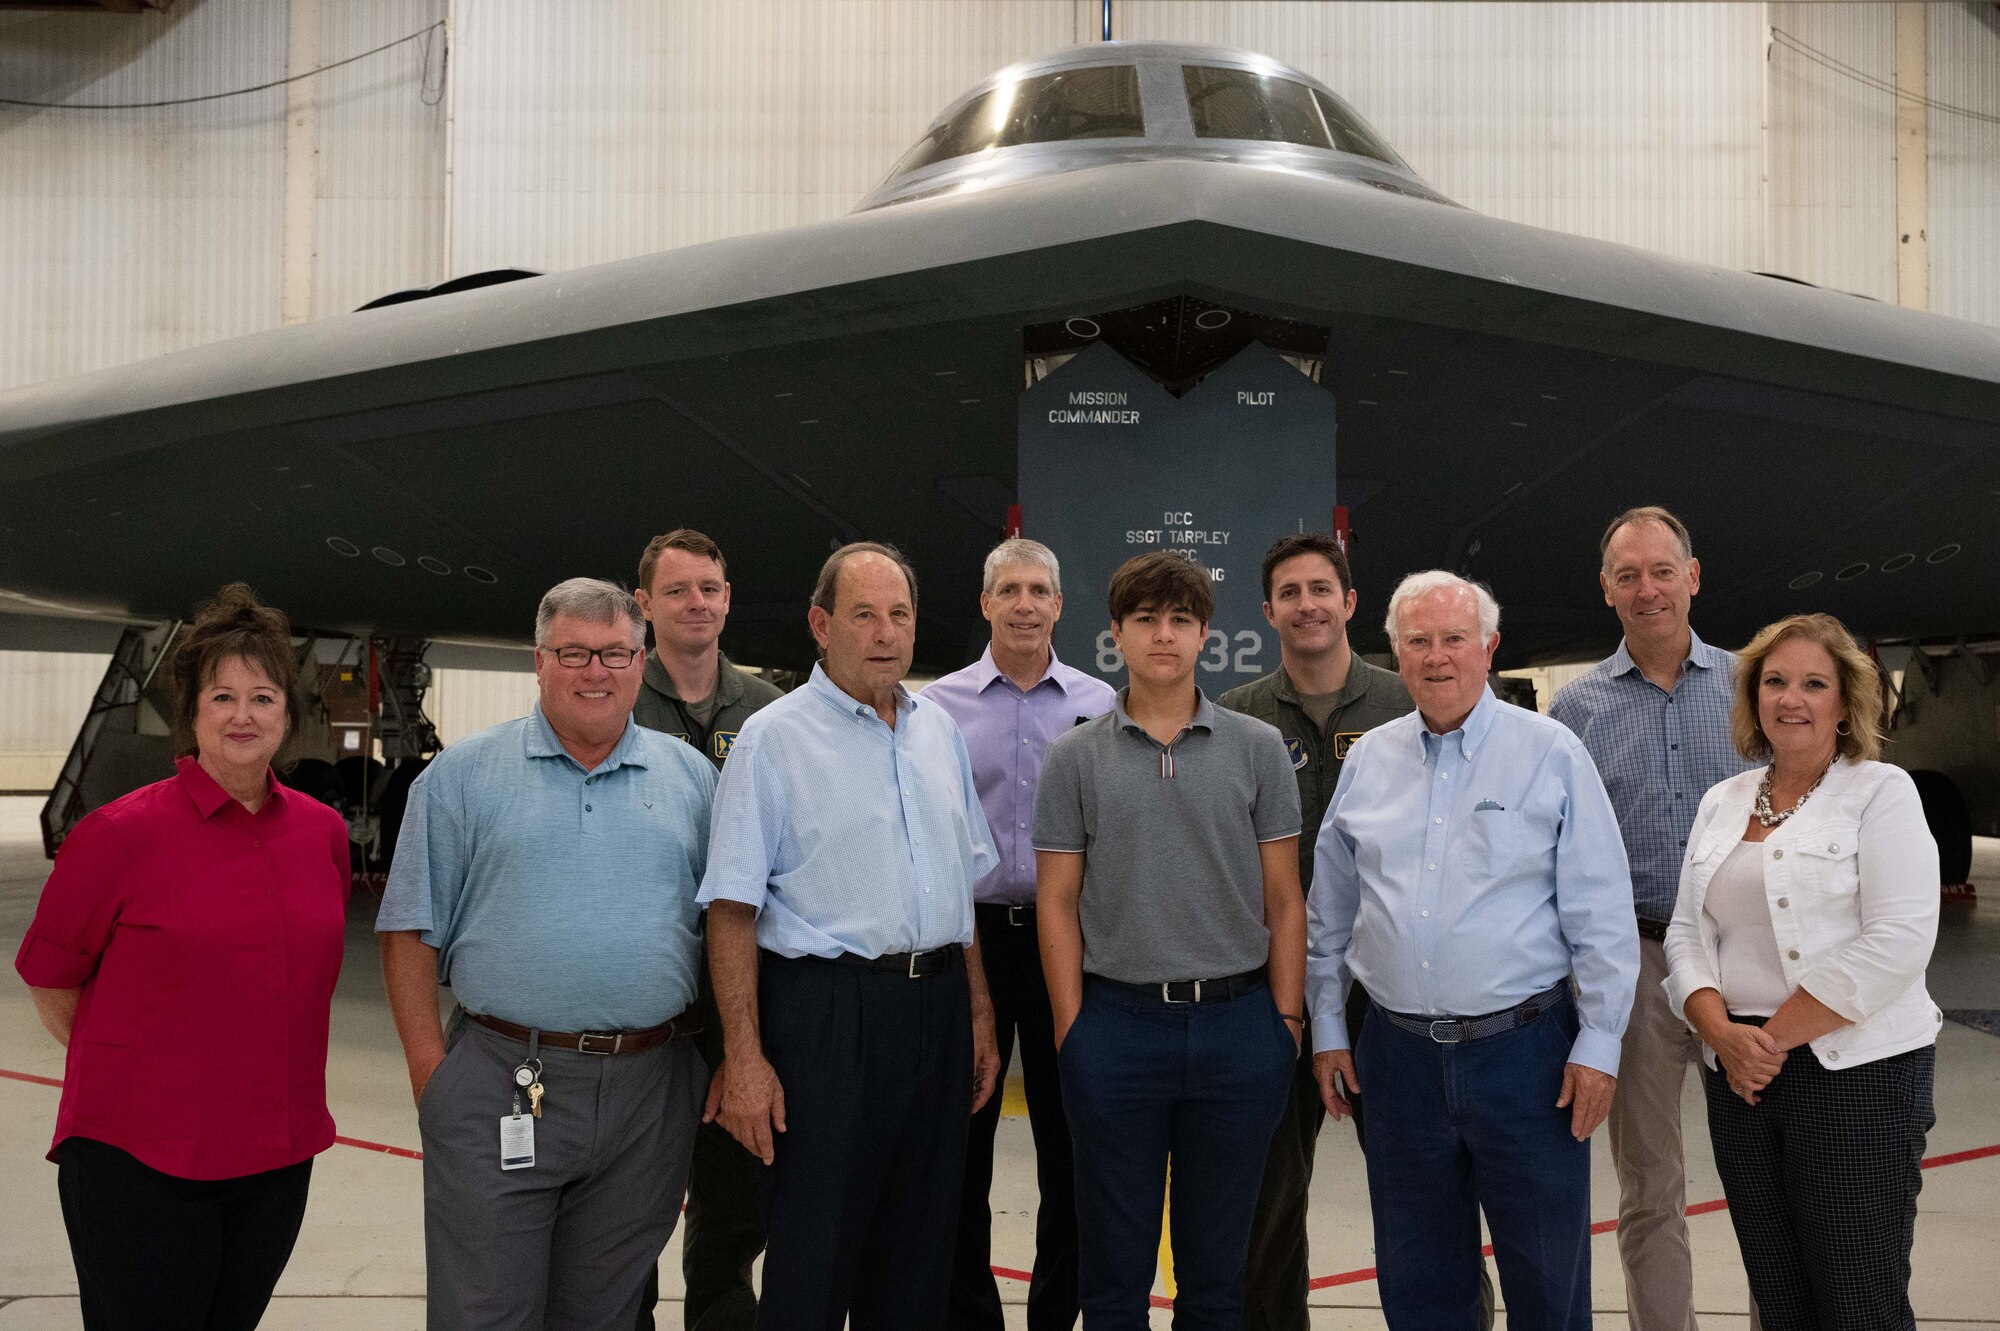 Federal Aviation Administration members and guests stand for a photo during a B-2 Spirit Stealth Bomber tour at Whiteman Air Force Base, Missouri, Sept. 08, 2022. FAA members met with Whiteman AFB leadership to receive a better understanding of the 509th Bomb Wing’s mission and the integral role they play at Whiteman. (U.S Air Force Photo by Senior Airman Christina Carter)